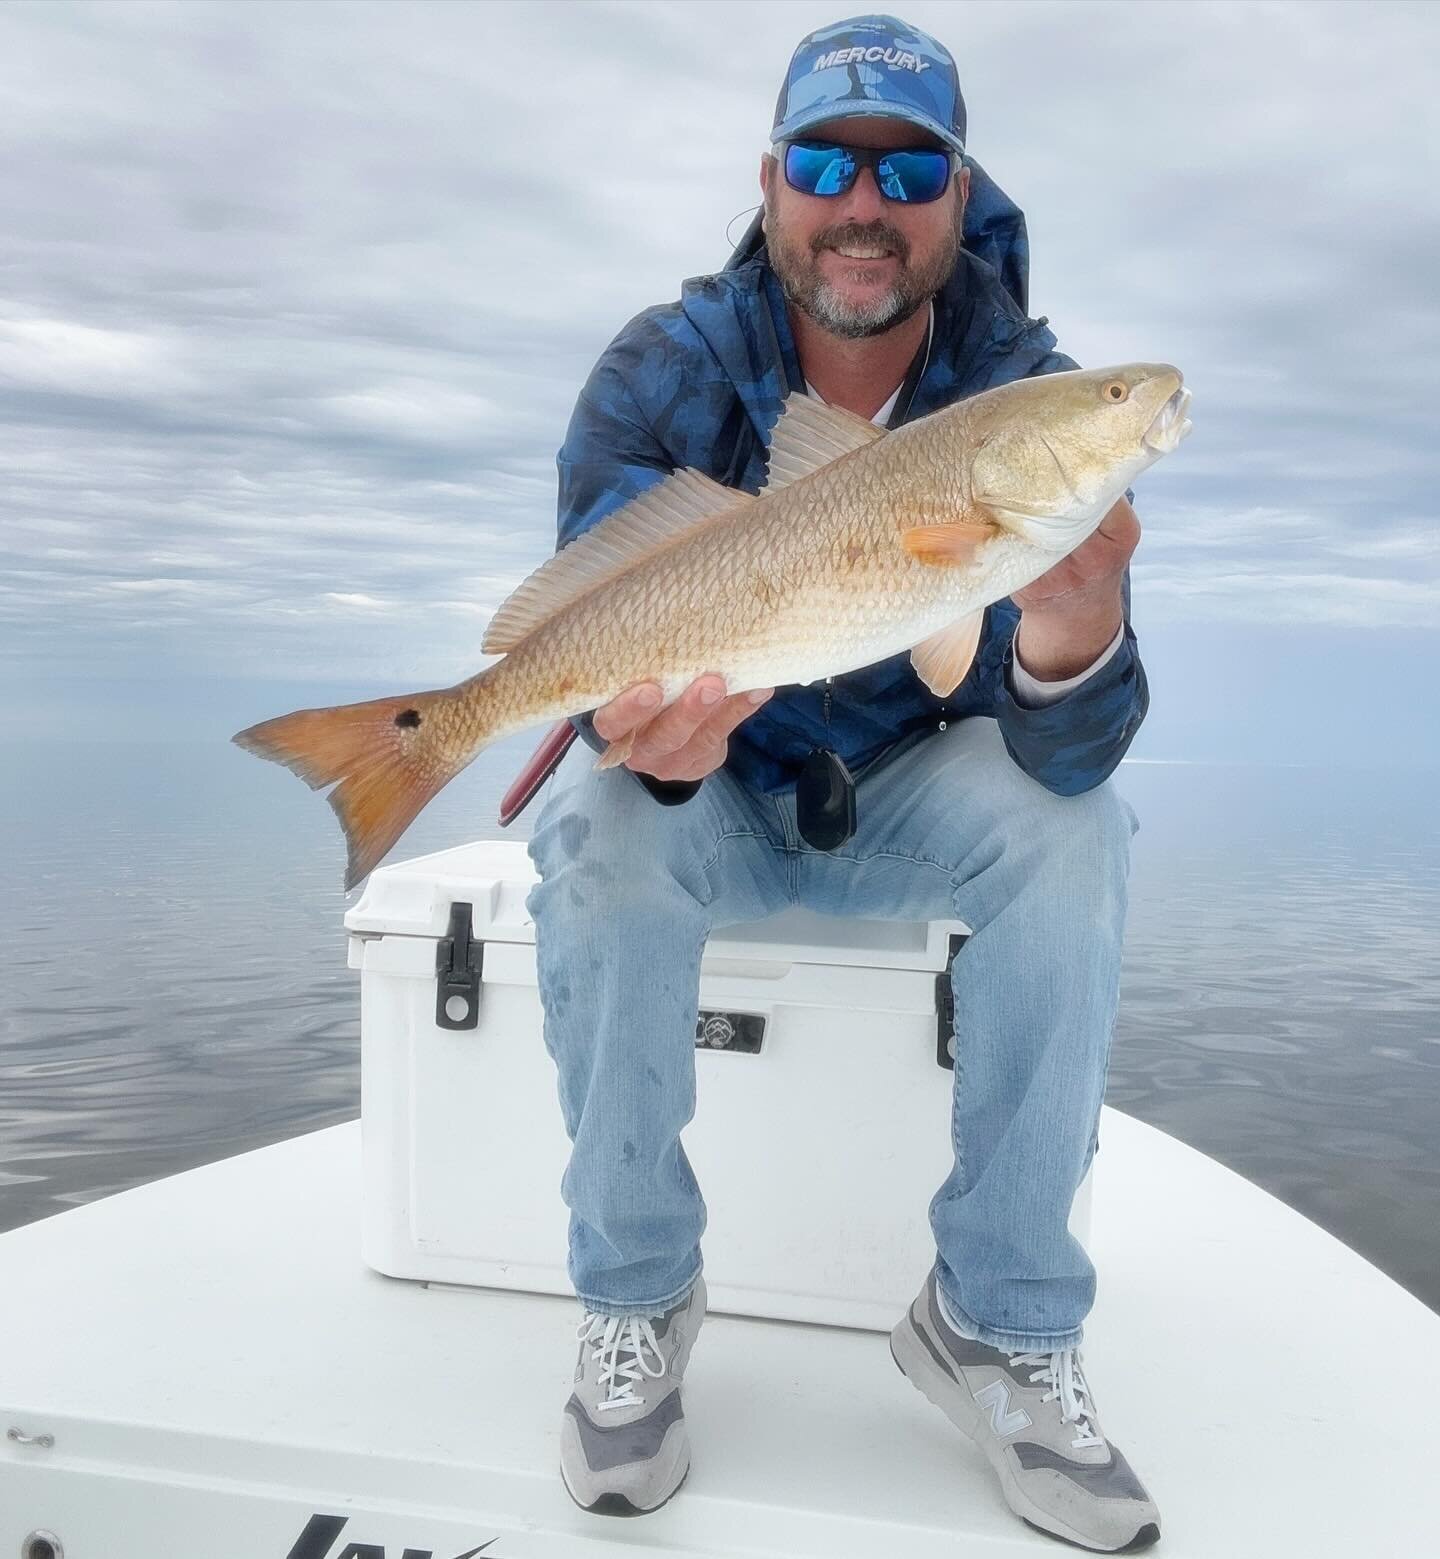 After a busy busy morning filled with decisions on decisions it called for a lil prop testing and decompression time just me the camera boat and a flat full of spooky redfish! I tricked a few into playing while the other 57 showed me how loud I was b